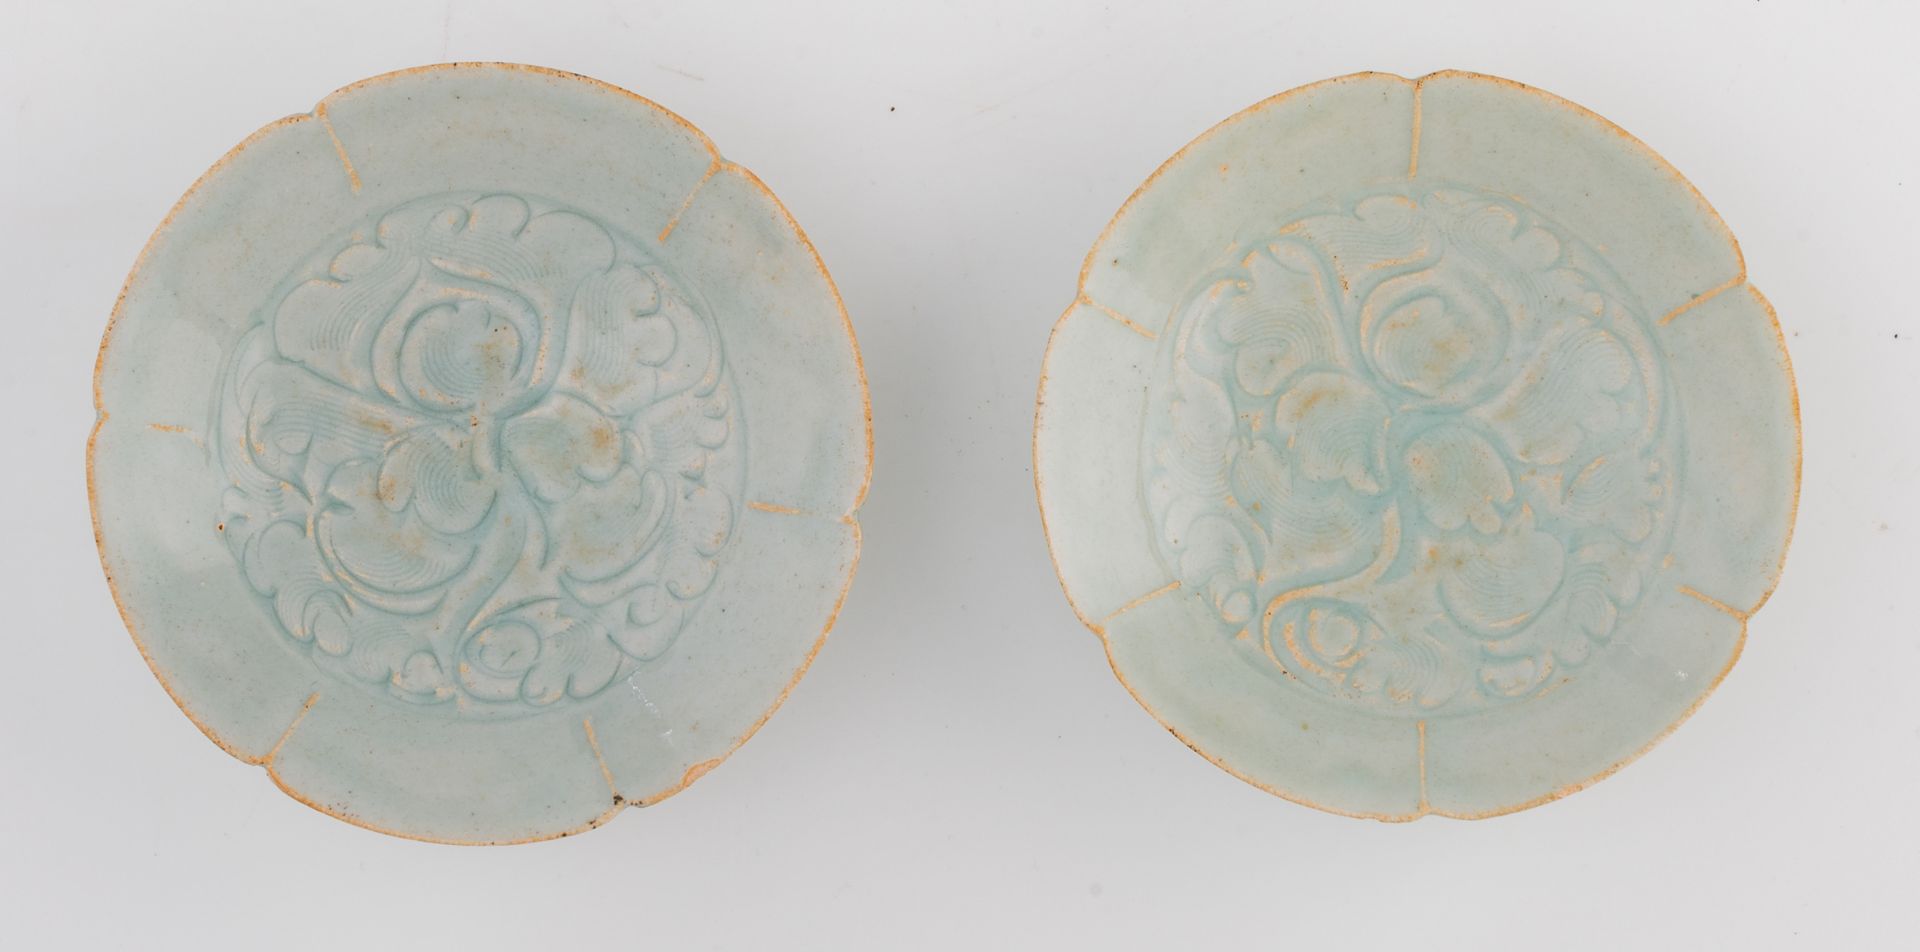 Two Chinese Song dynasty incised lotus shaped dishes with lobed edge, H 4 - ø 15,5 - 16 cm - Image 6 of 7